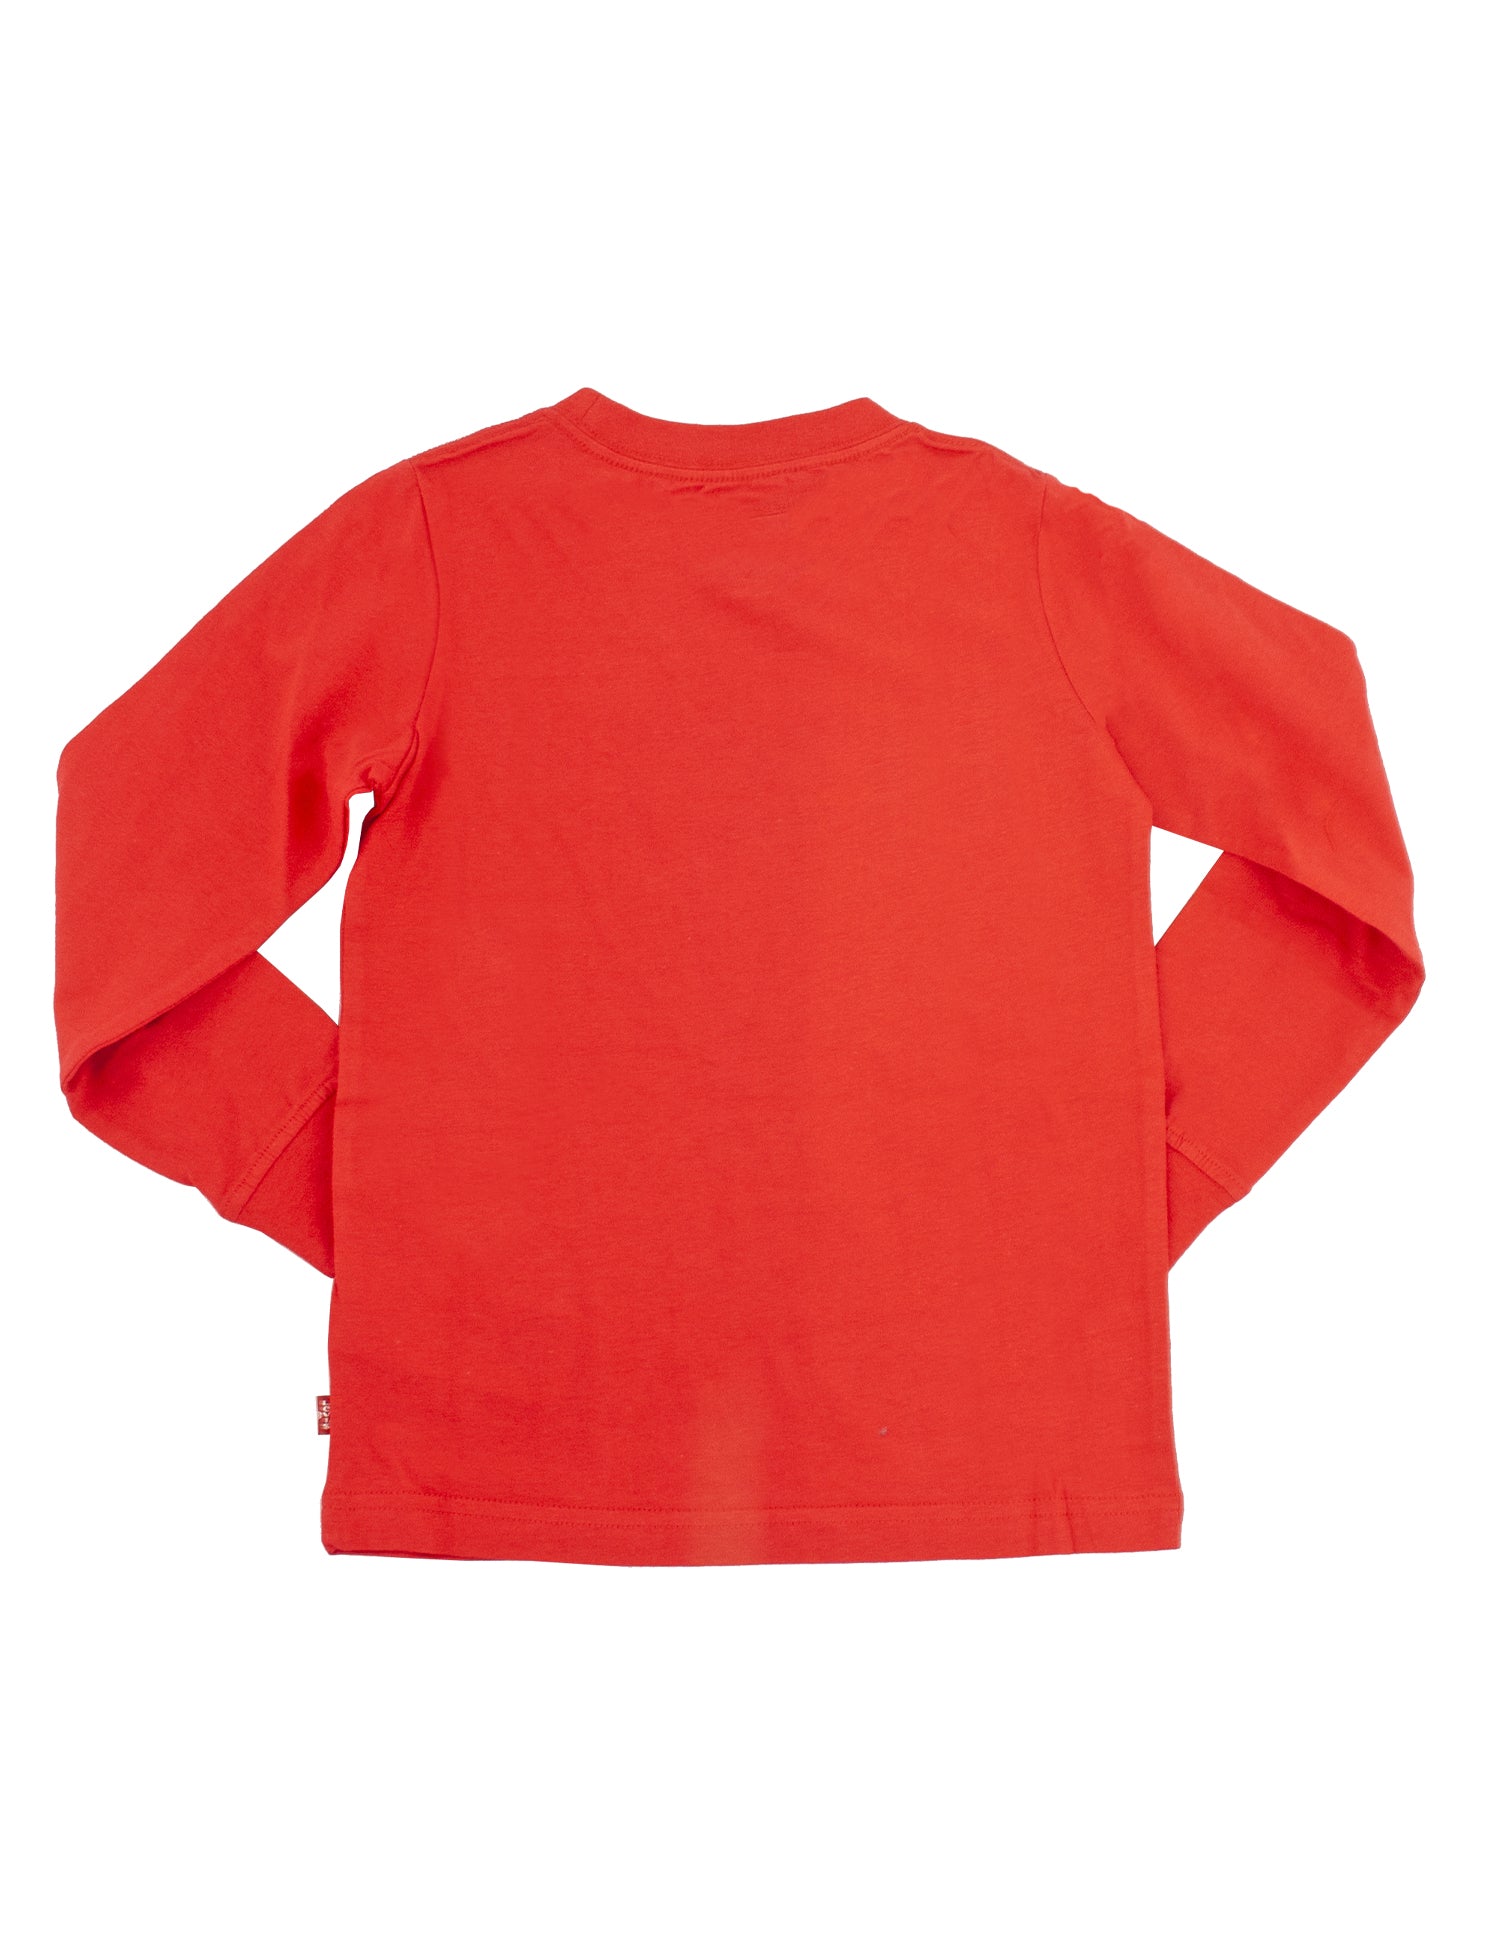 LEVI'S
Levi's Batwing red long sleeve t-shirt